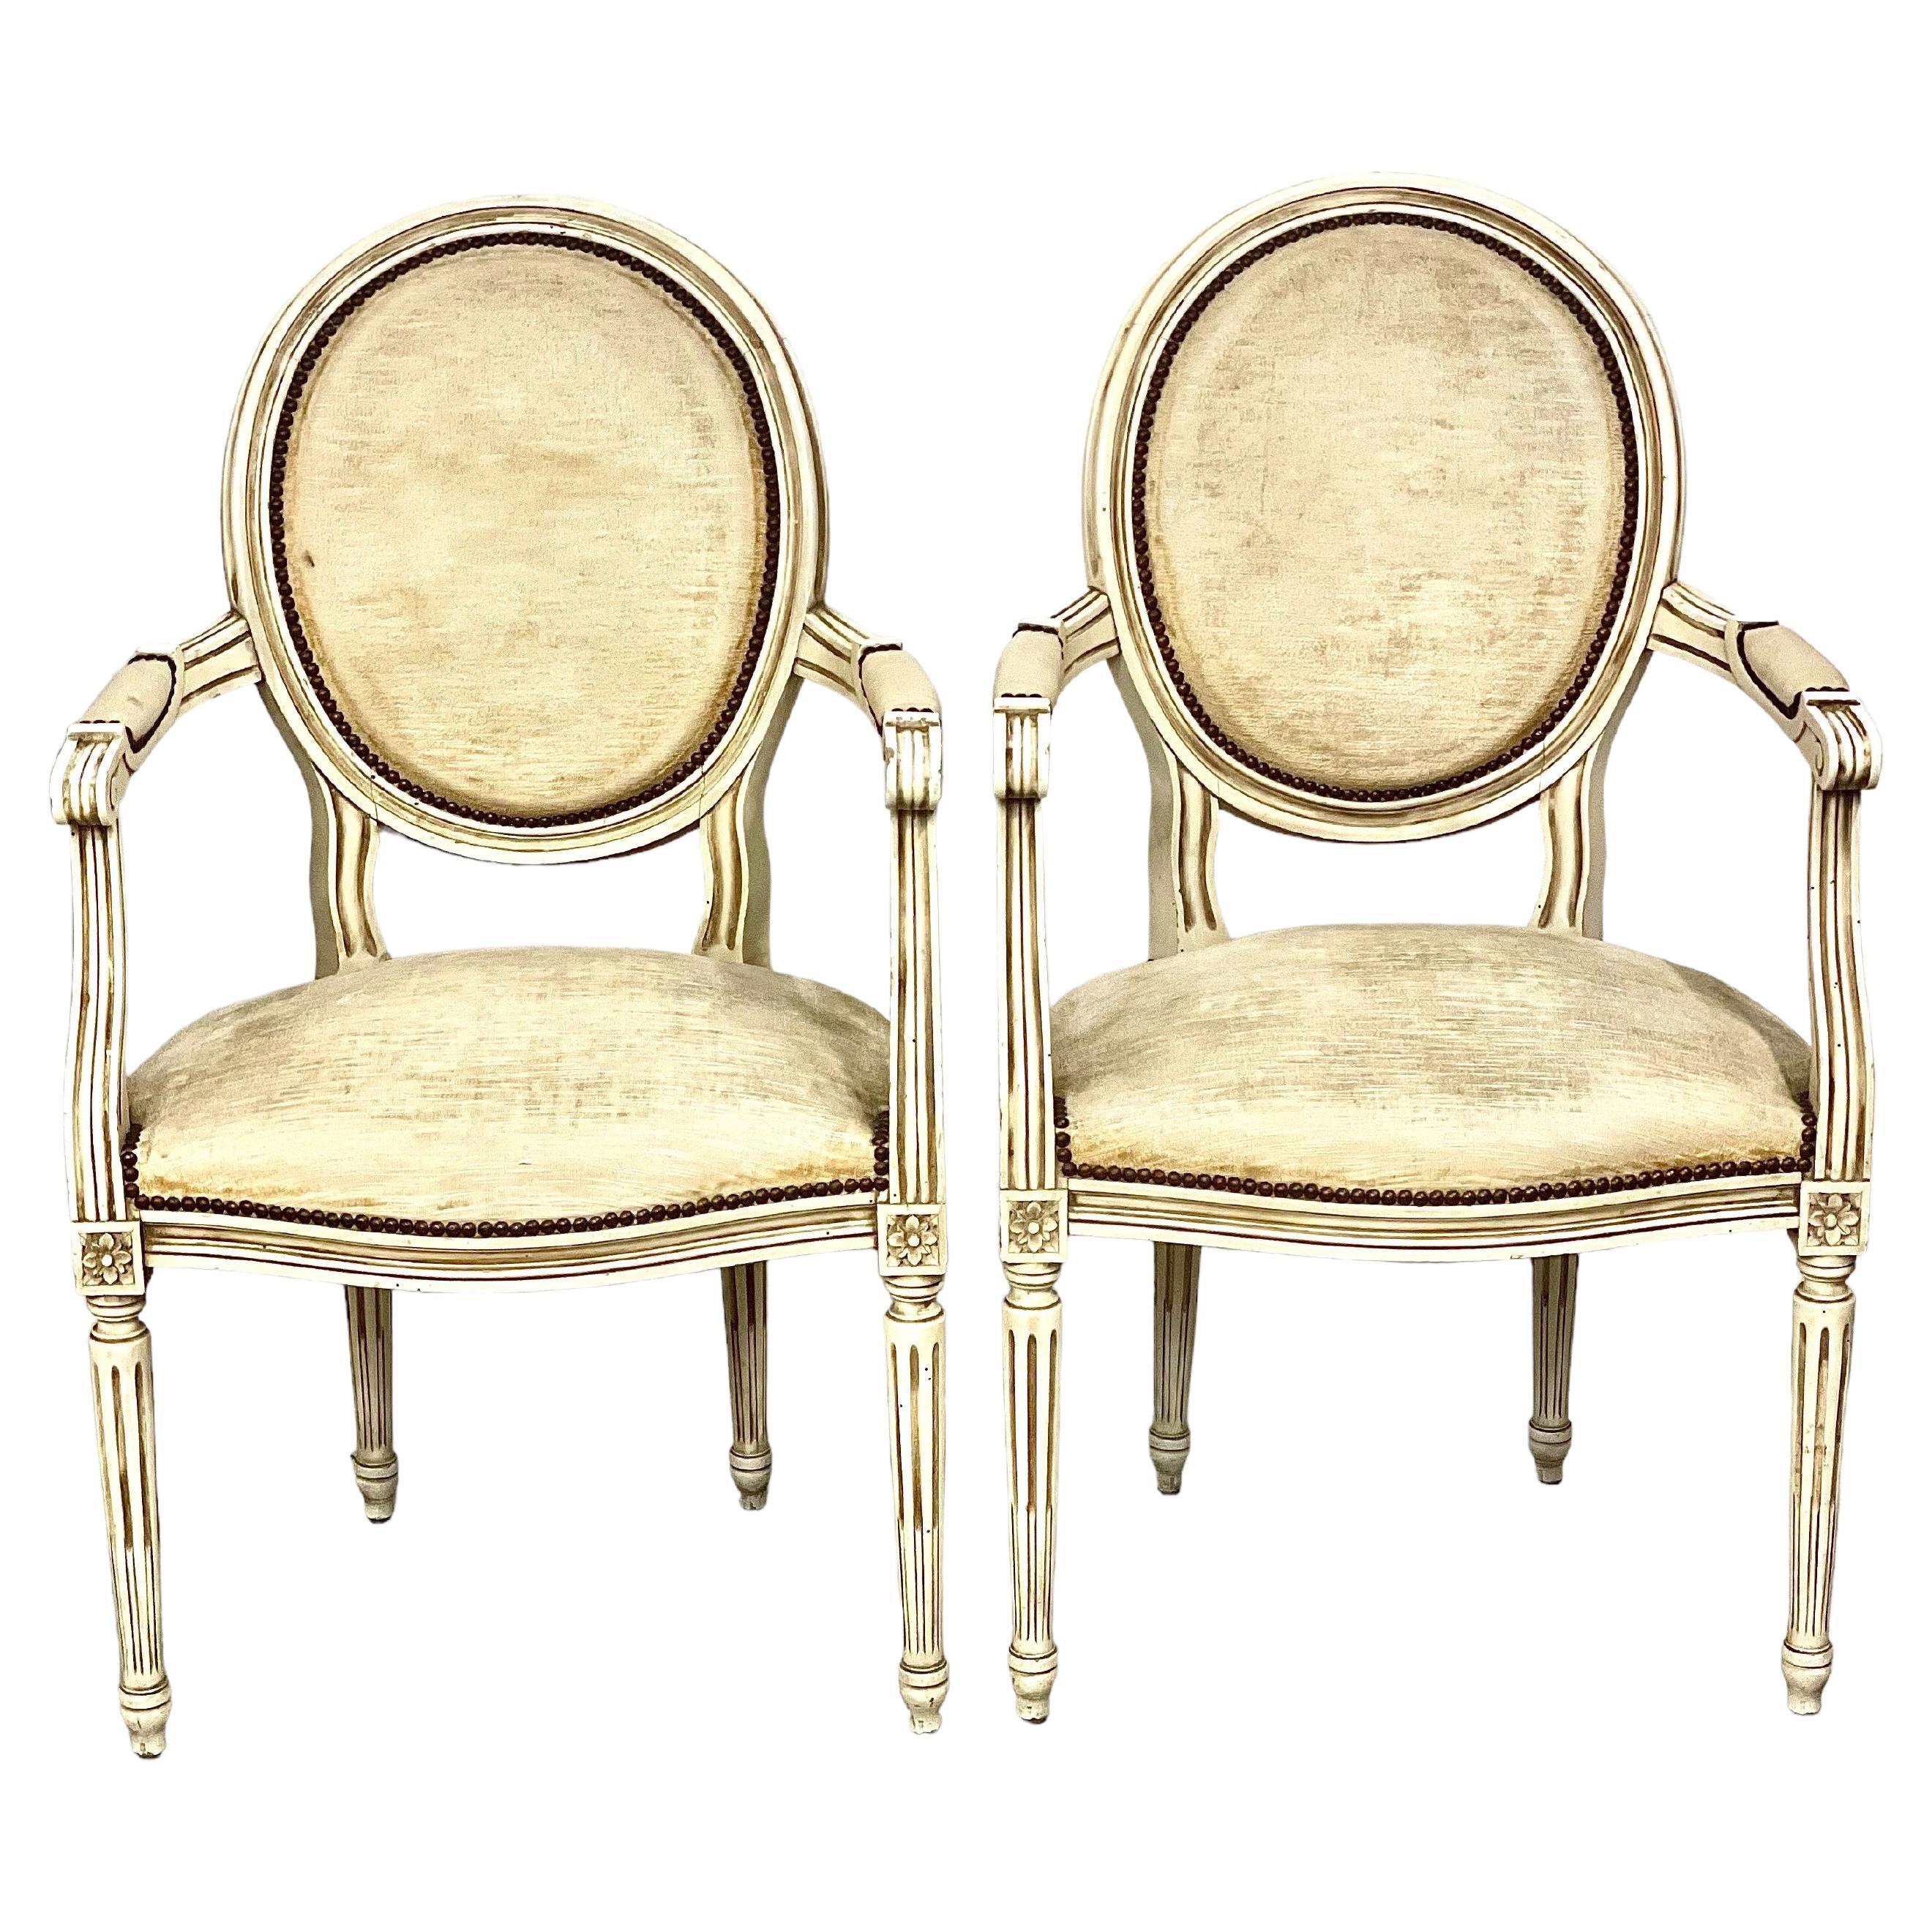 Antique Pair of French Louis XVI Style Cabriolets Armchairs